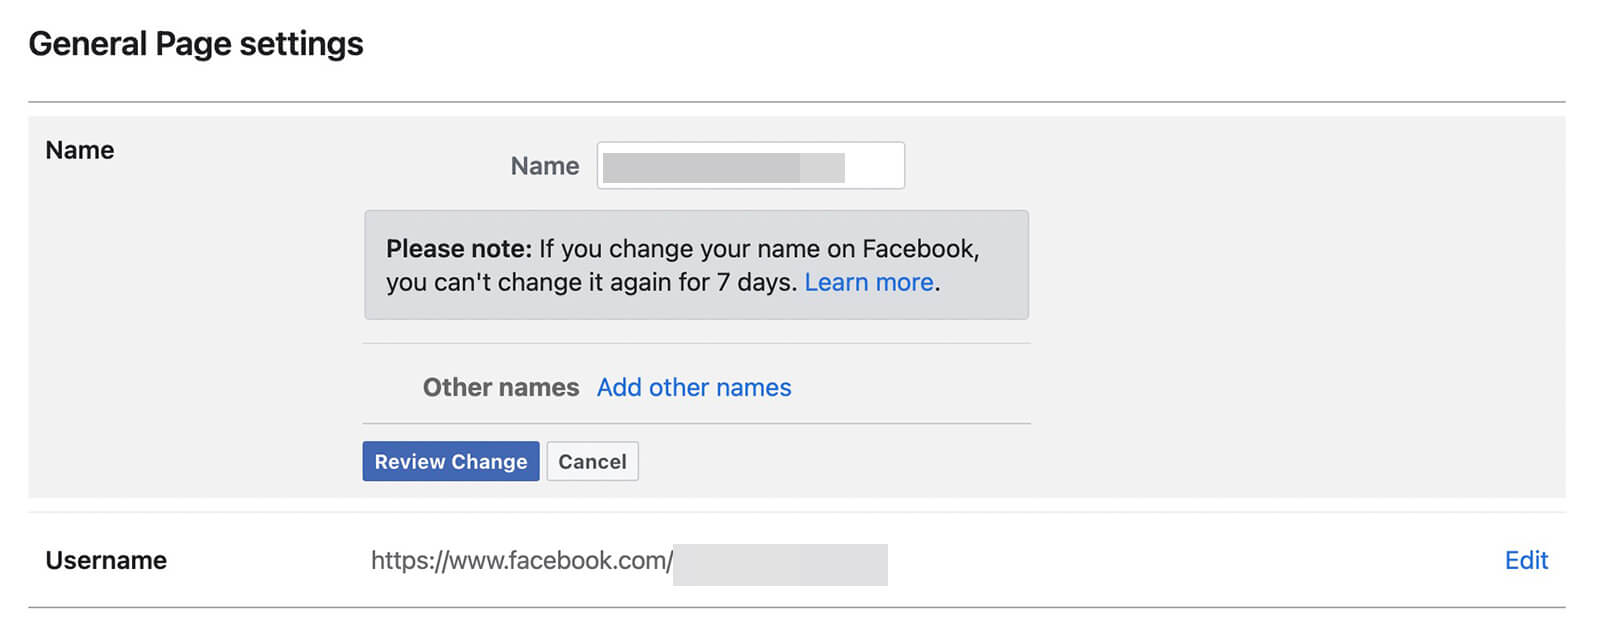 how-to-change-the-name-of-your-facebook-page-new-pages-experience-settings-edit-button-update-name-click-review-change-to-process-update-example-18